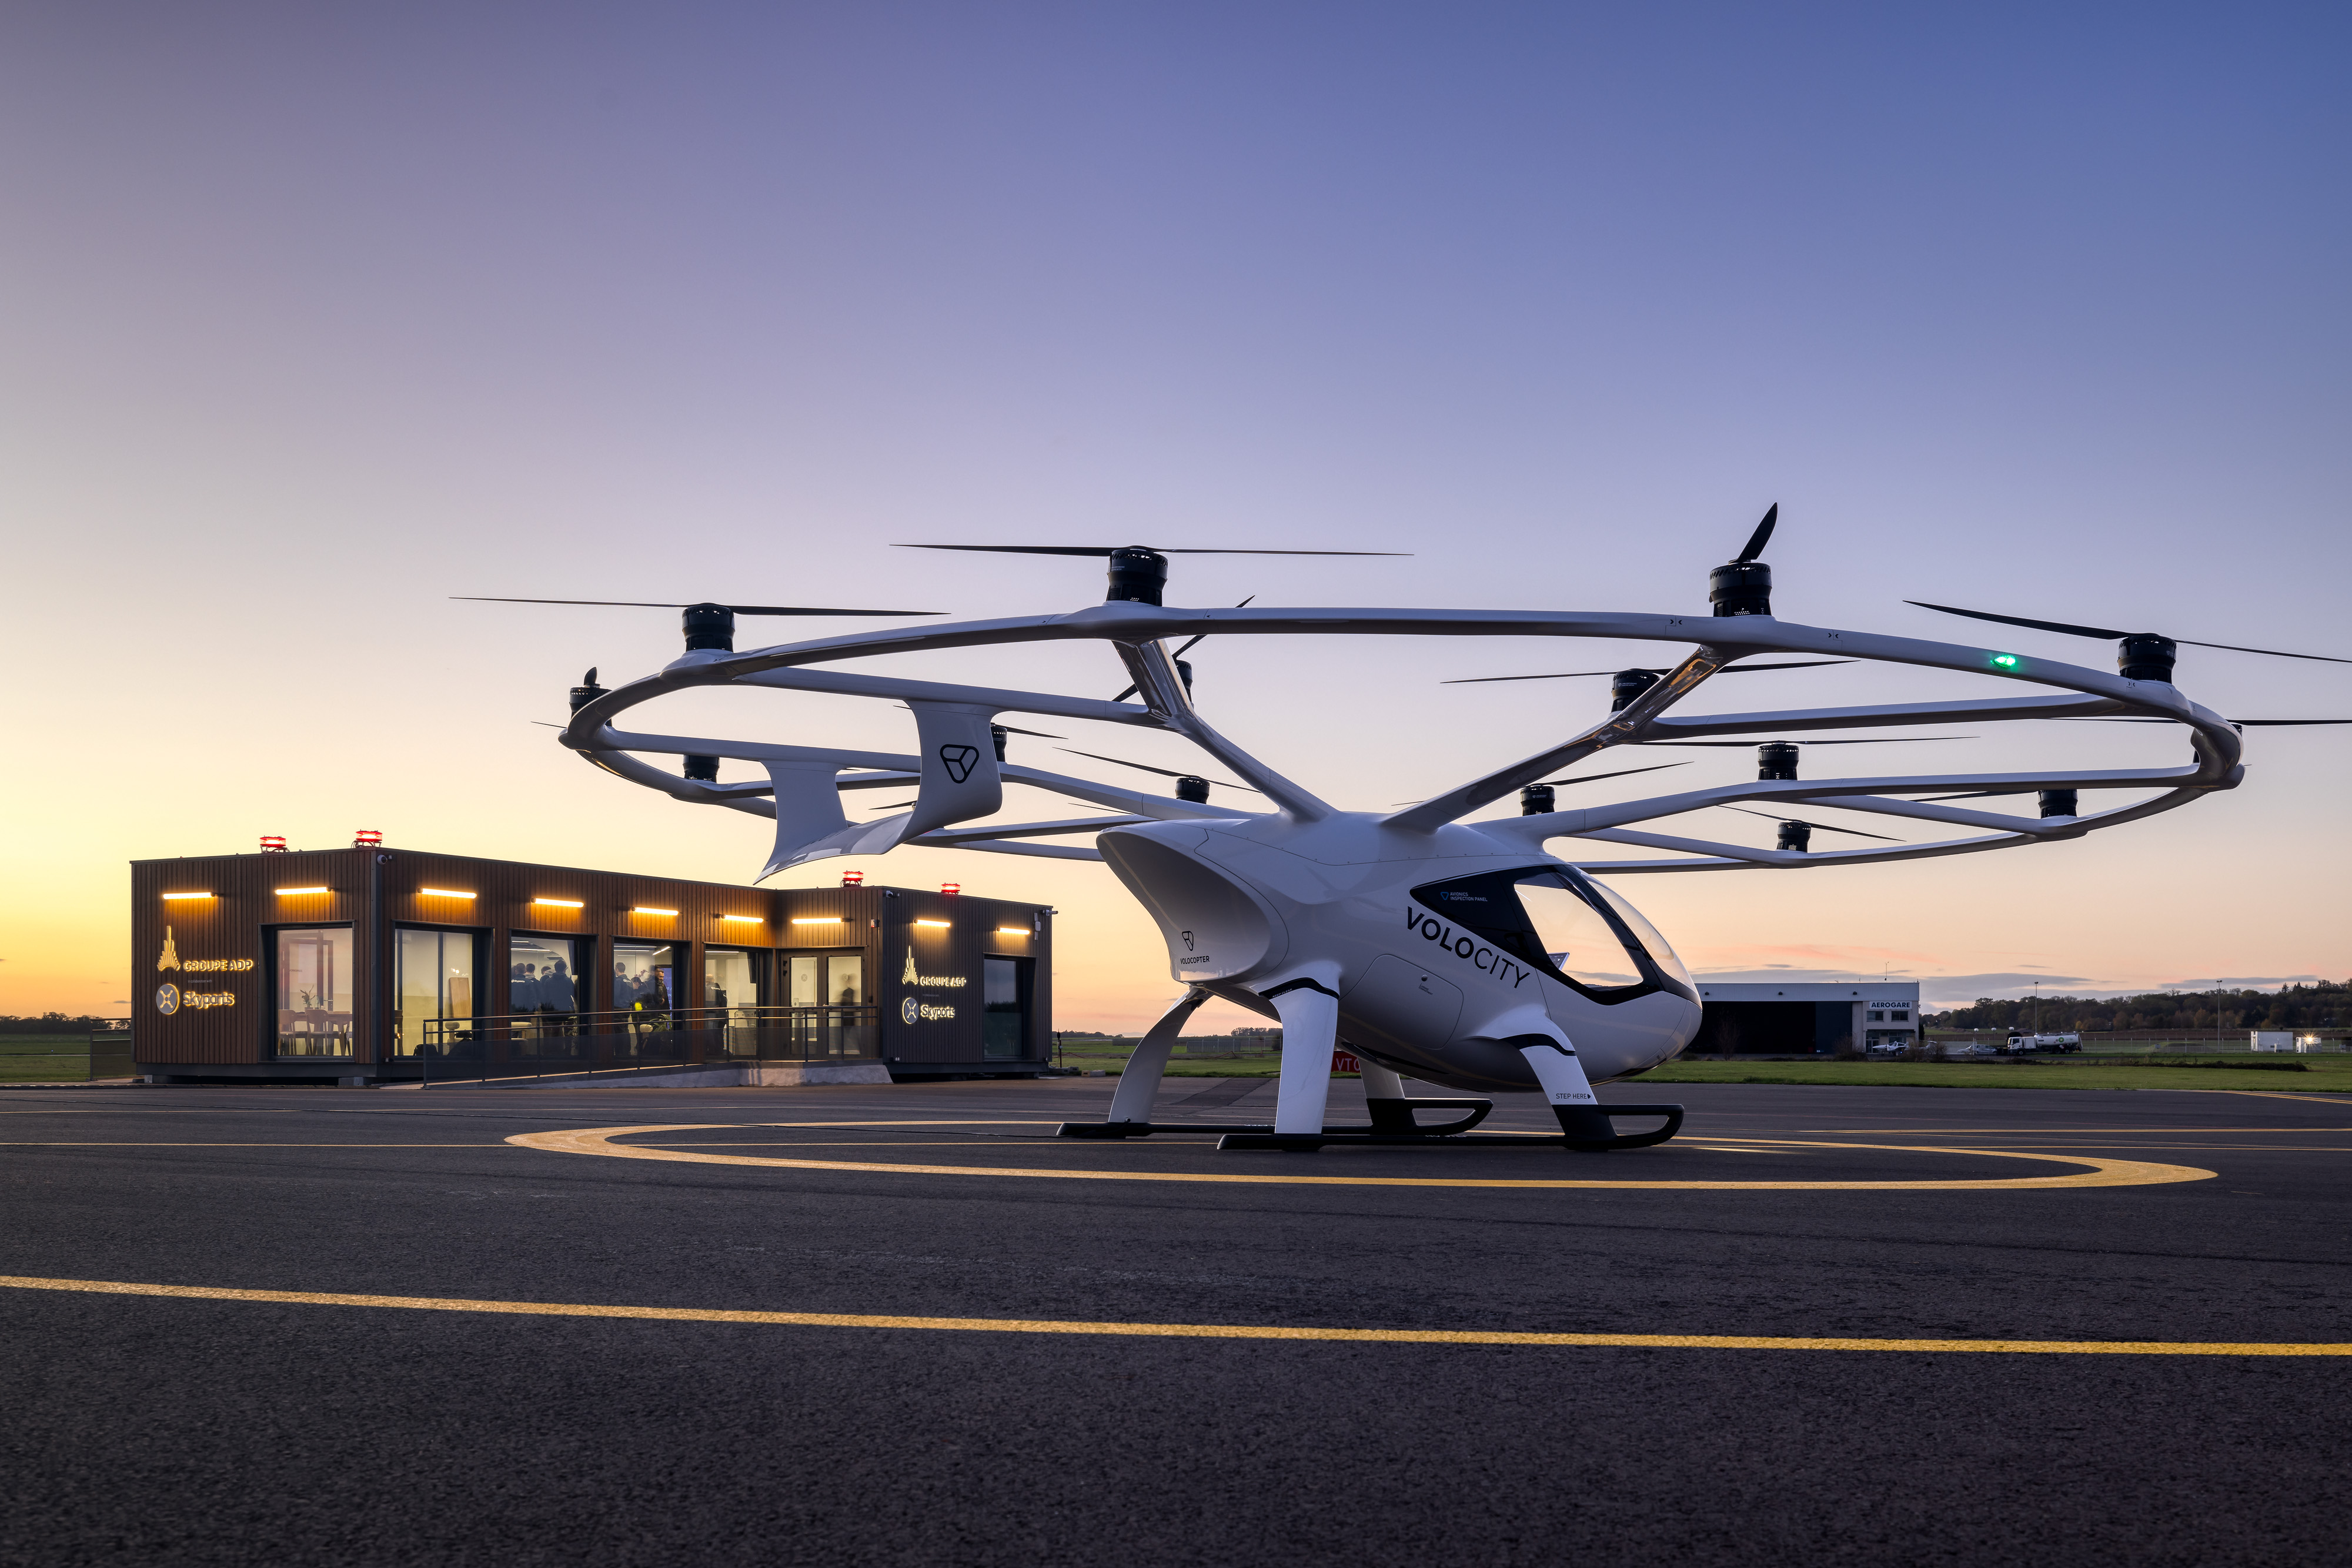 Skyports partners with Groupe ADP and Volocopter to launch European vertiport testbed